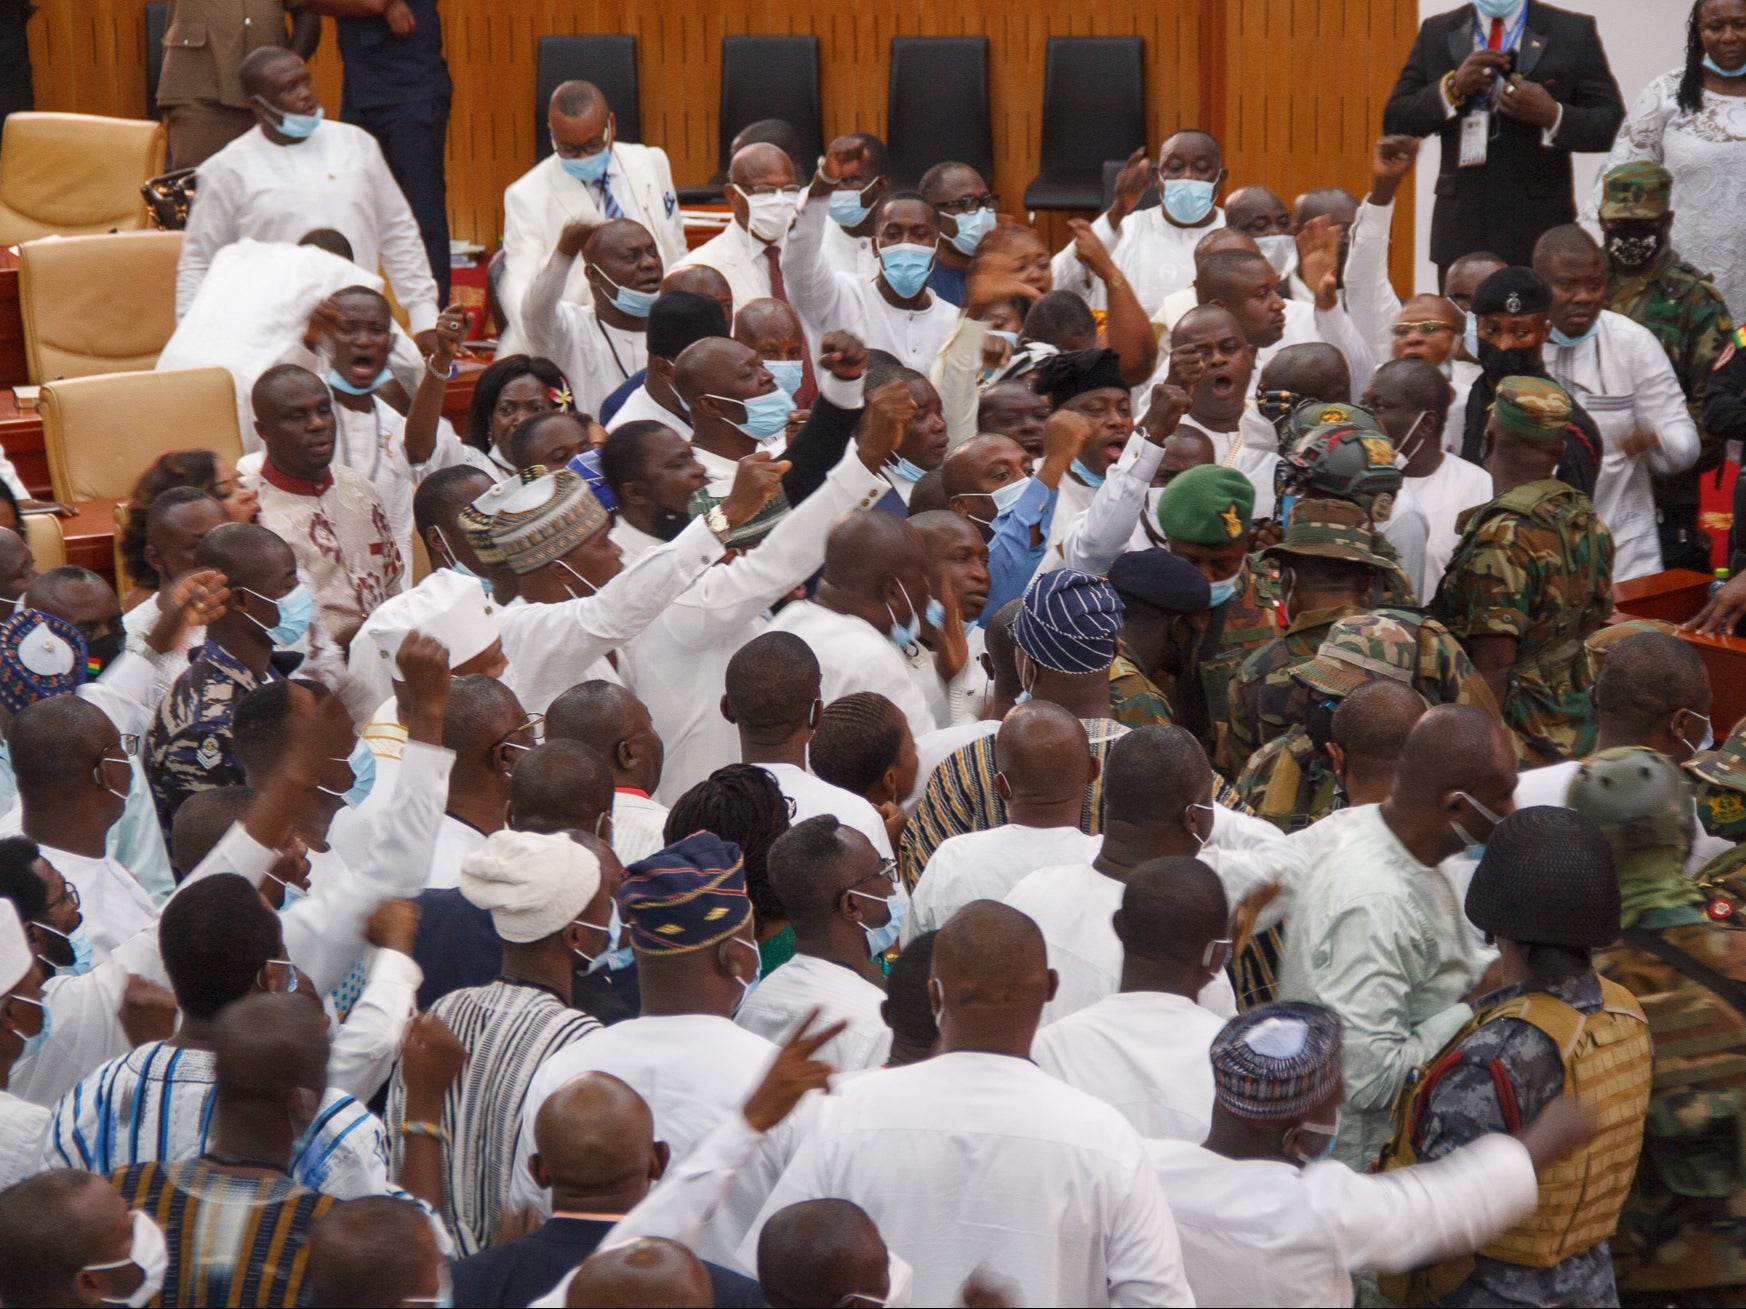 Ghanaian soldiers are seen at the parliament of Ghana during a scuffle between MPs in Accra, Ghana